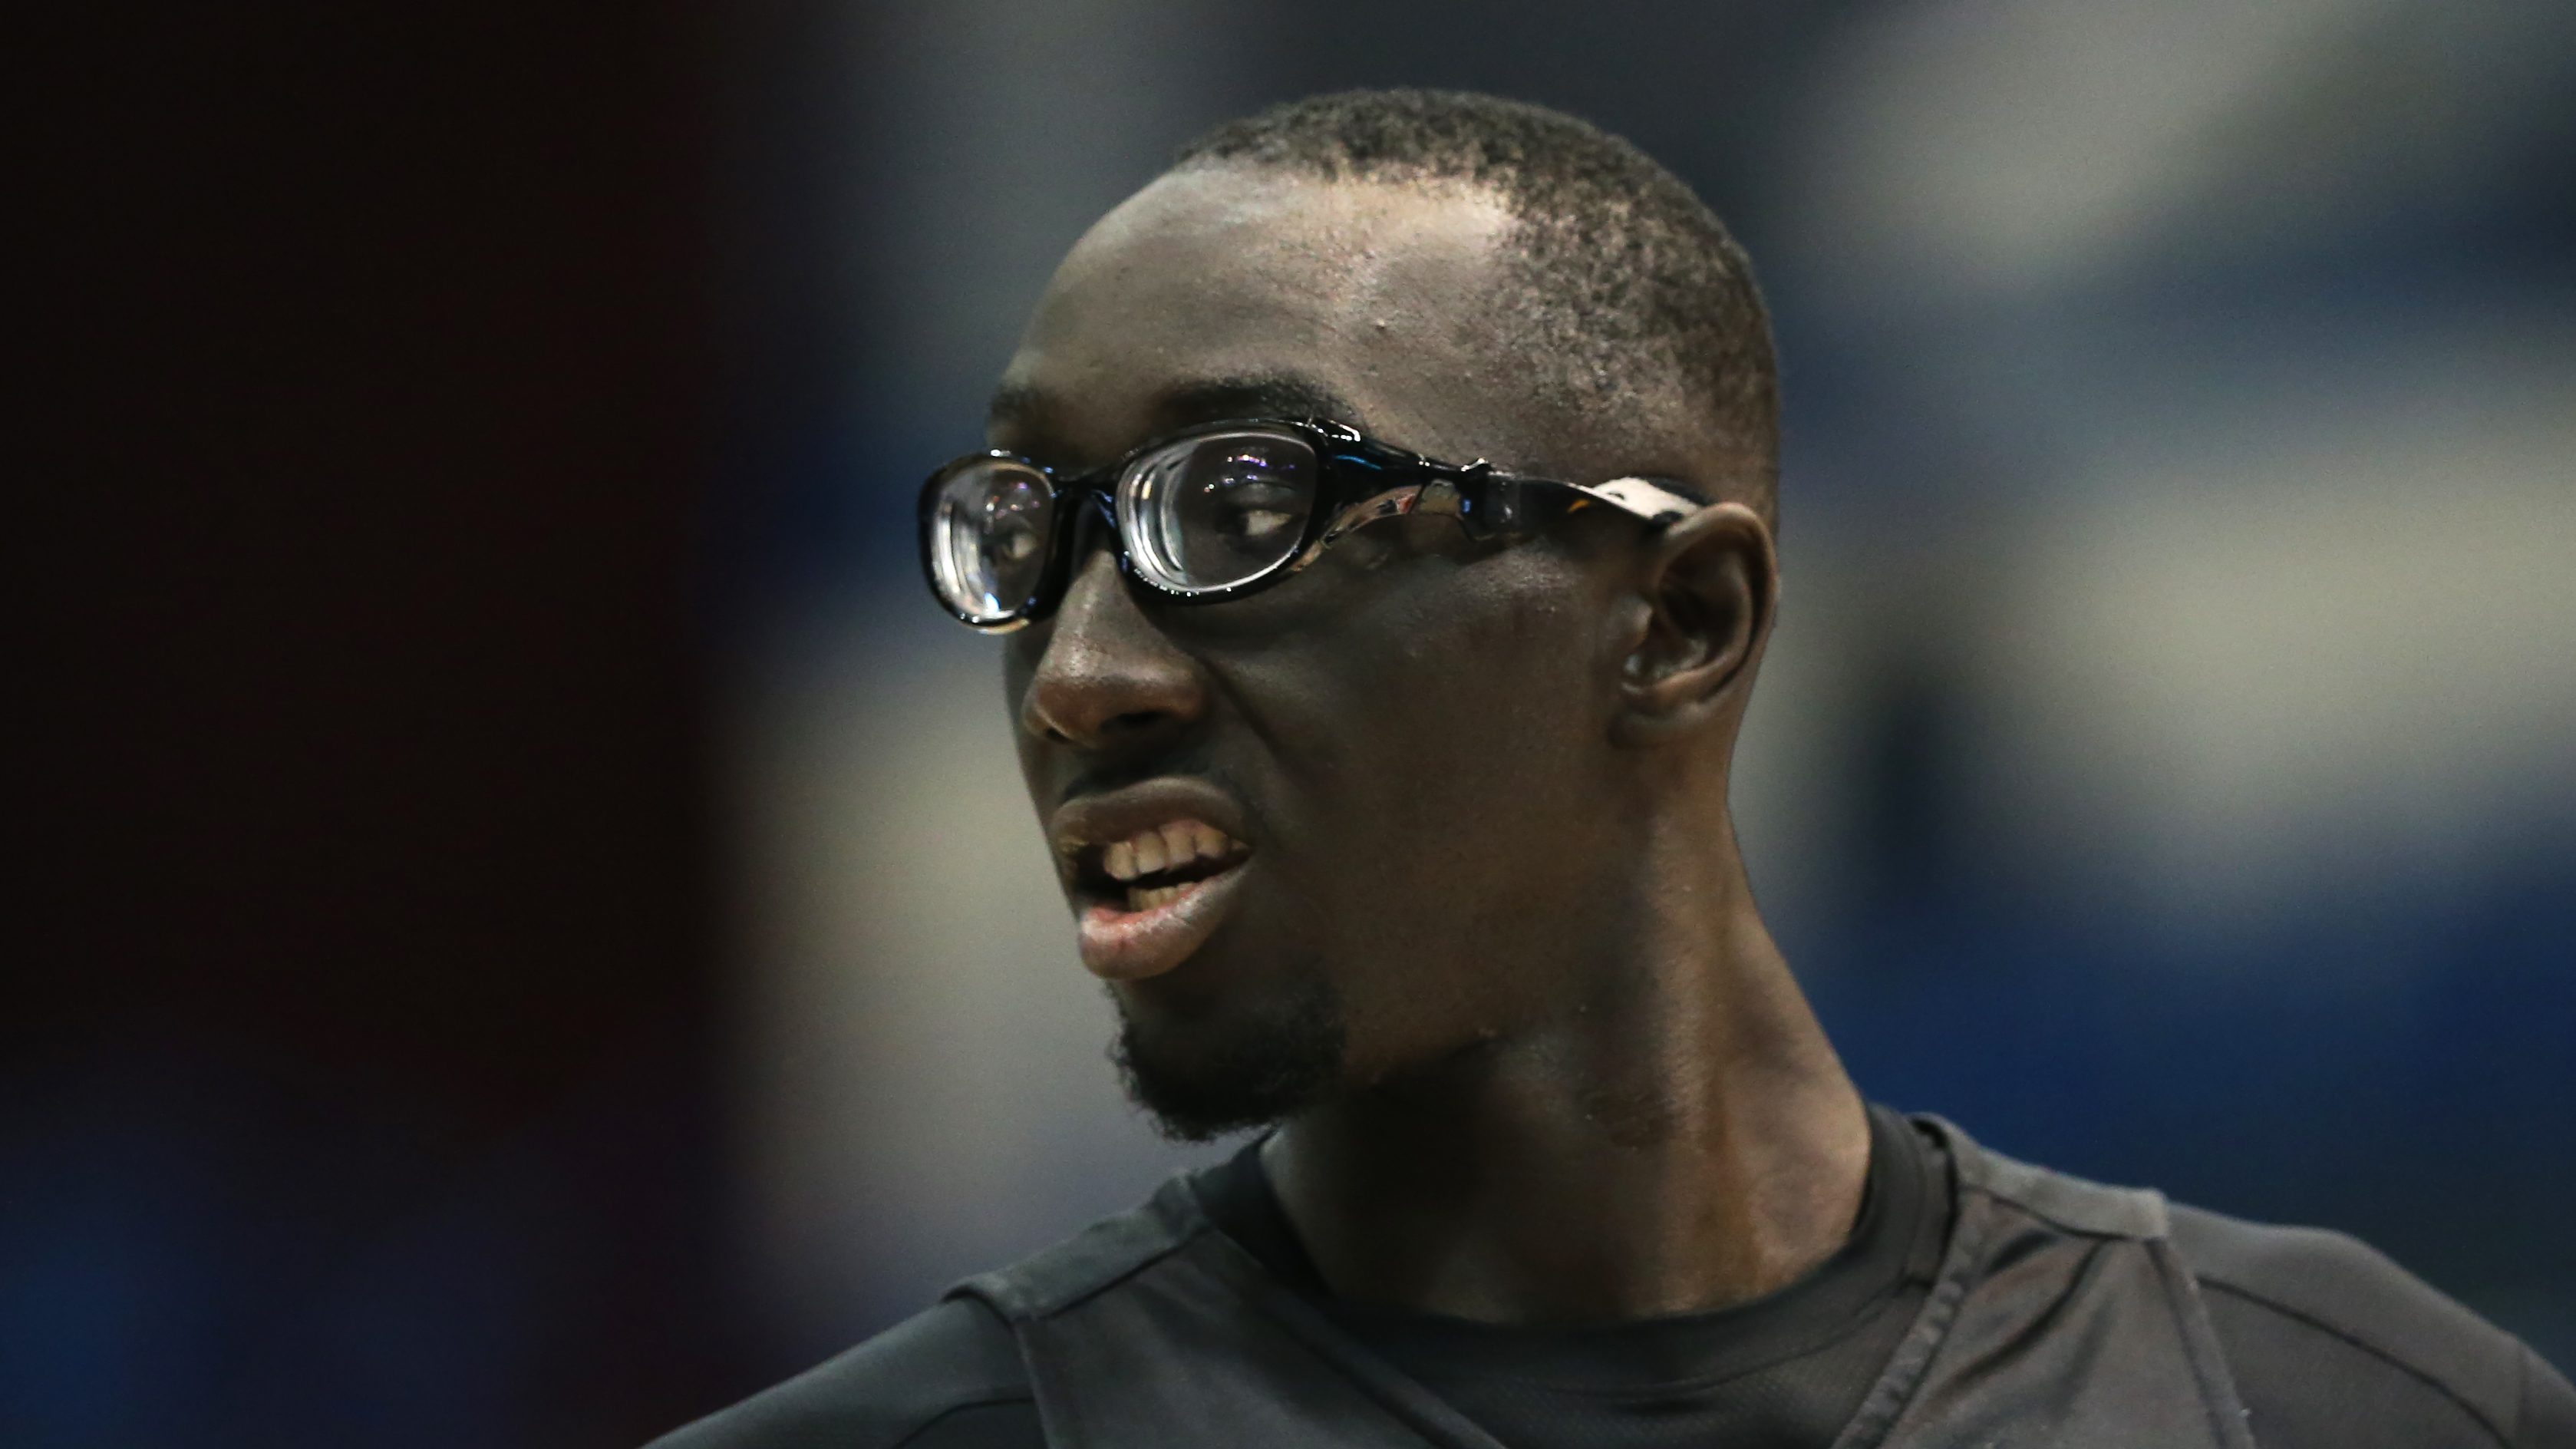 29 HQ Images Nba Draft Projections Tacko Fall : Celtics Agree To Deal With Undrafted Icf Big Man Tacko Fall